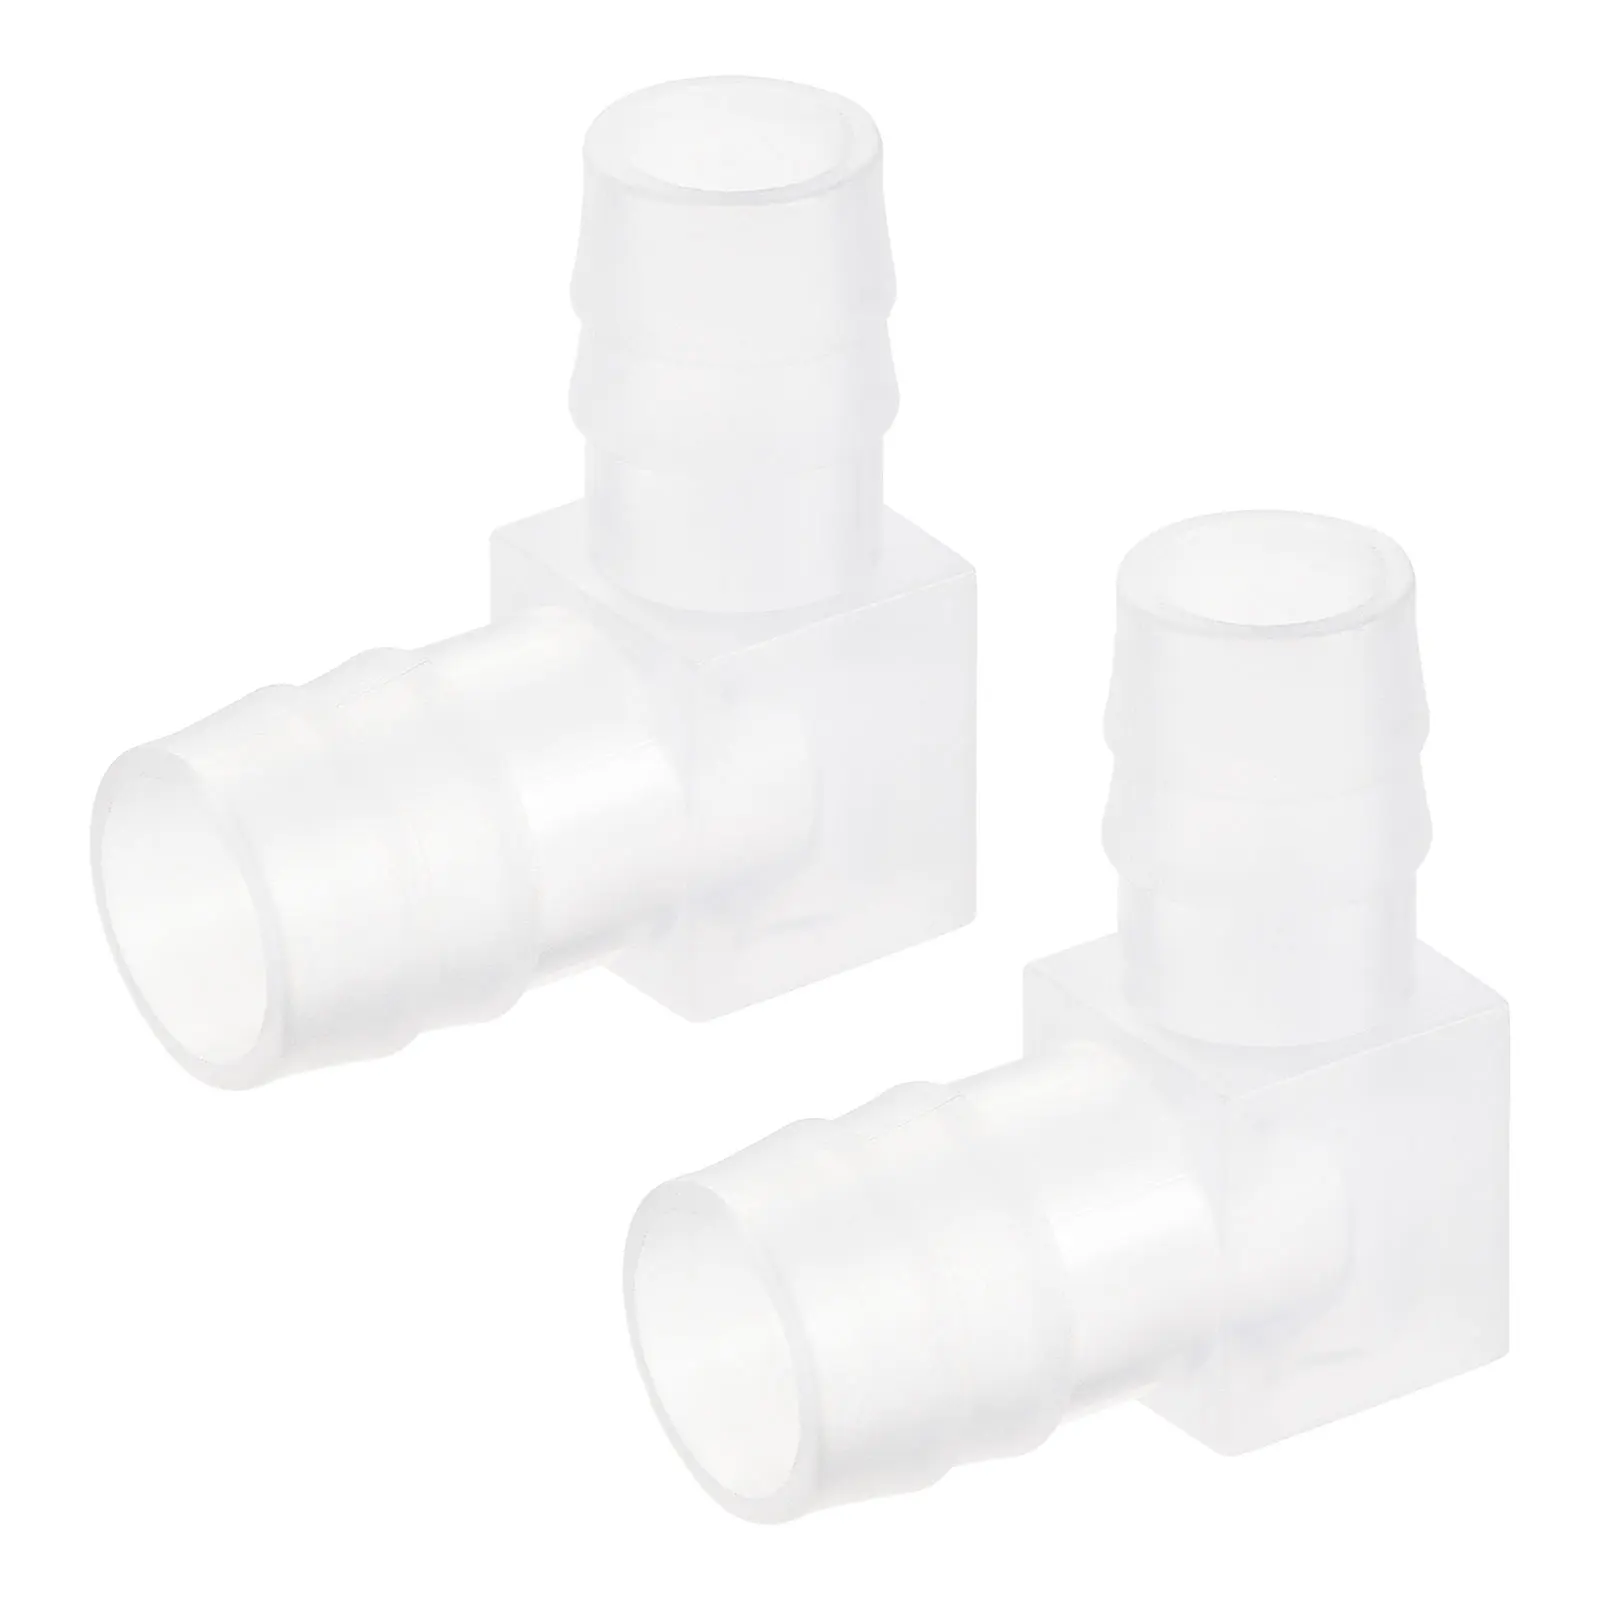 

Uxcell Barb Hose Fitting, 11mm to 13mm Barbed Dia. Plastic Elbow Coupler Reducer Quick Connector Adapter, Pack of 2